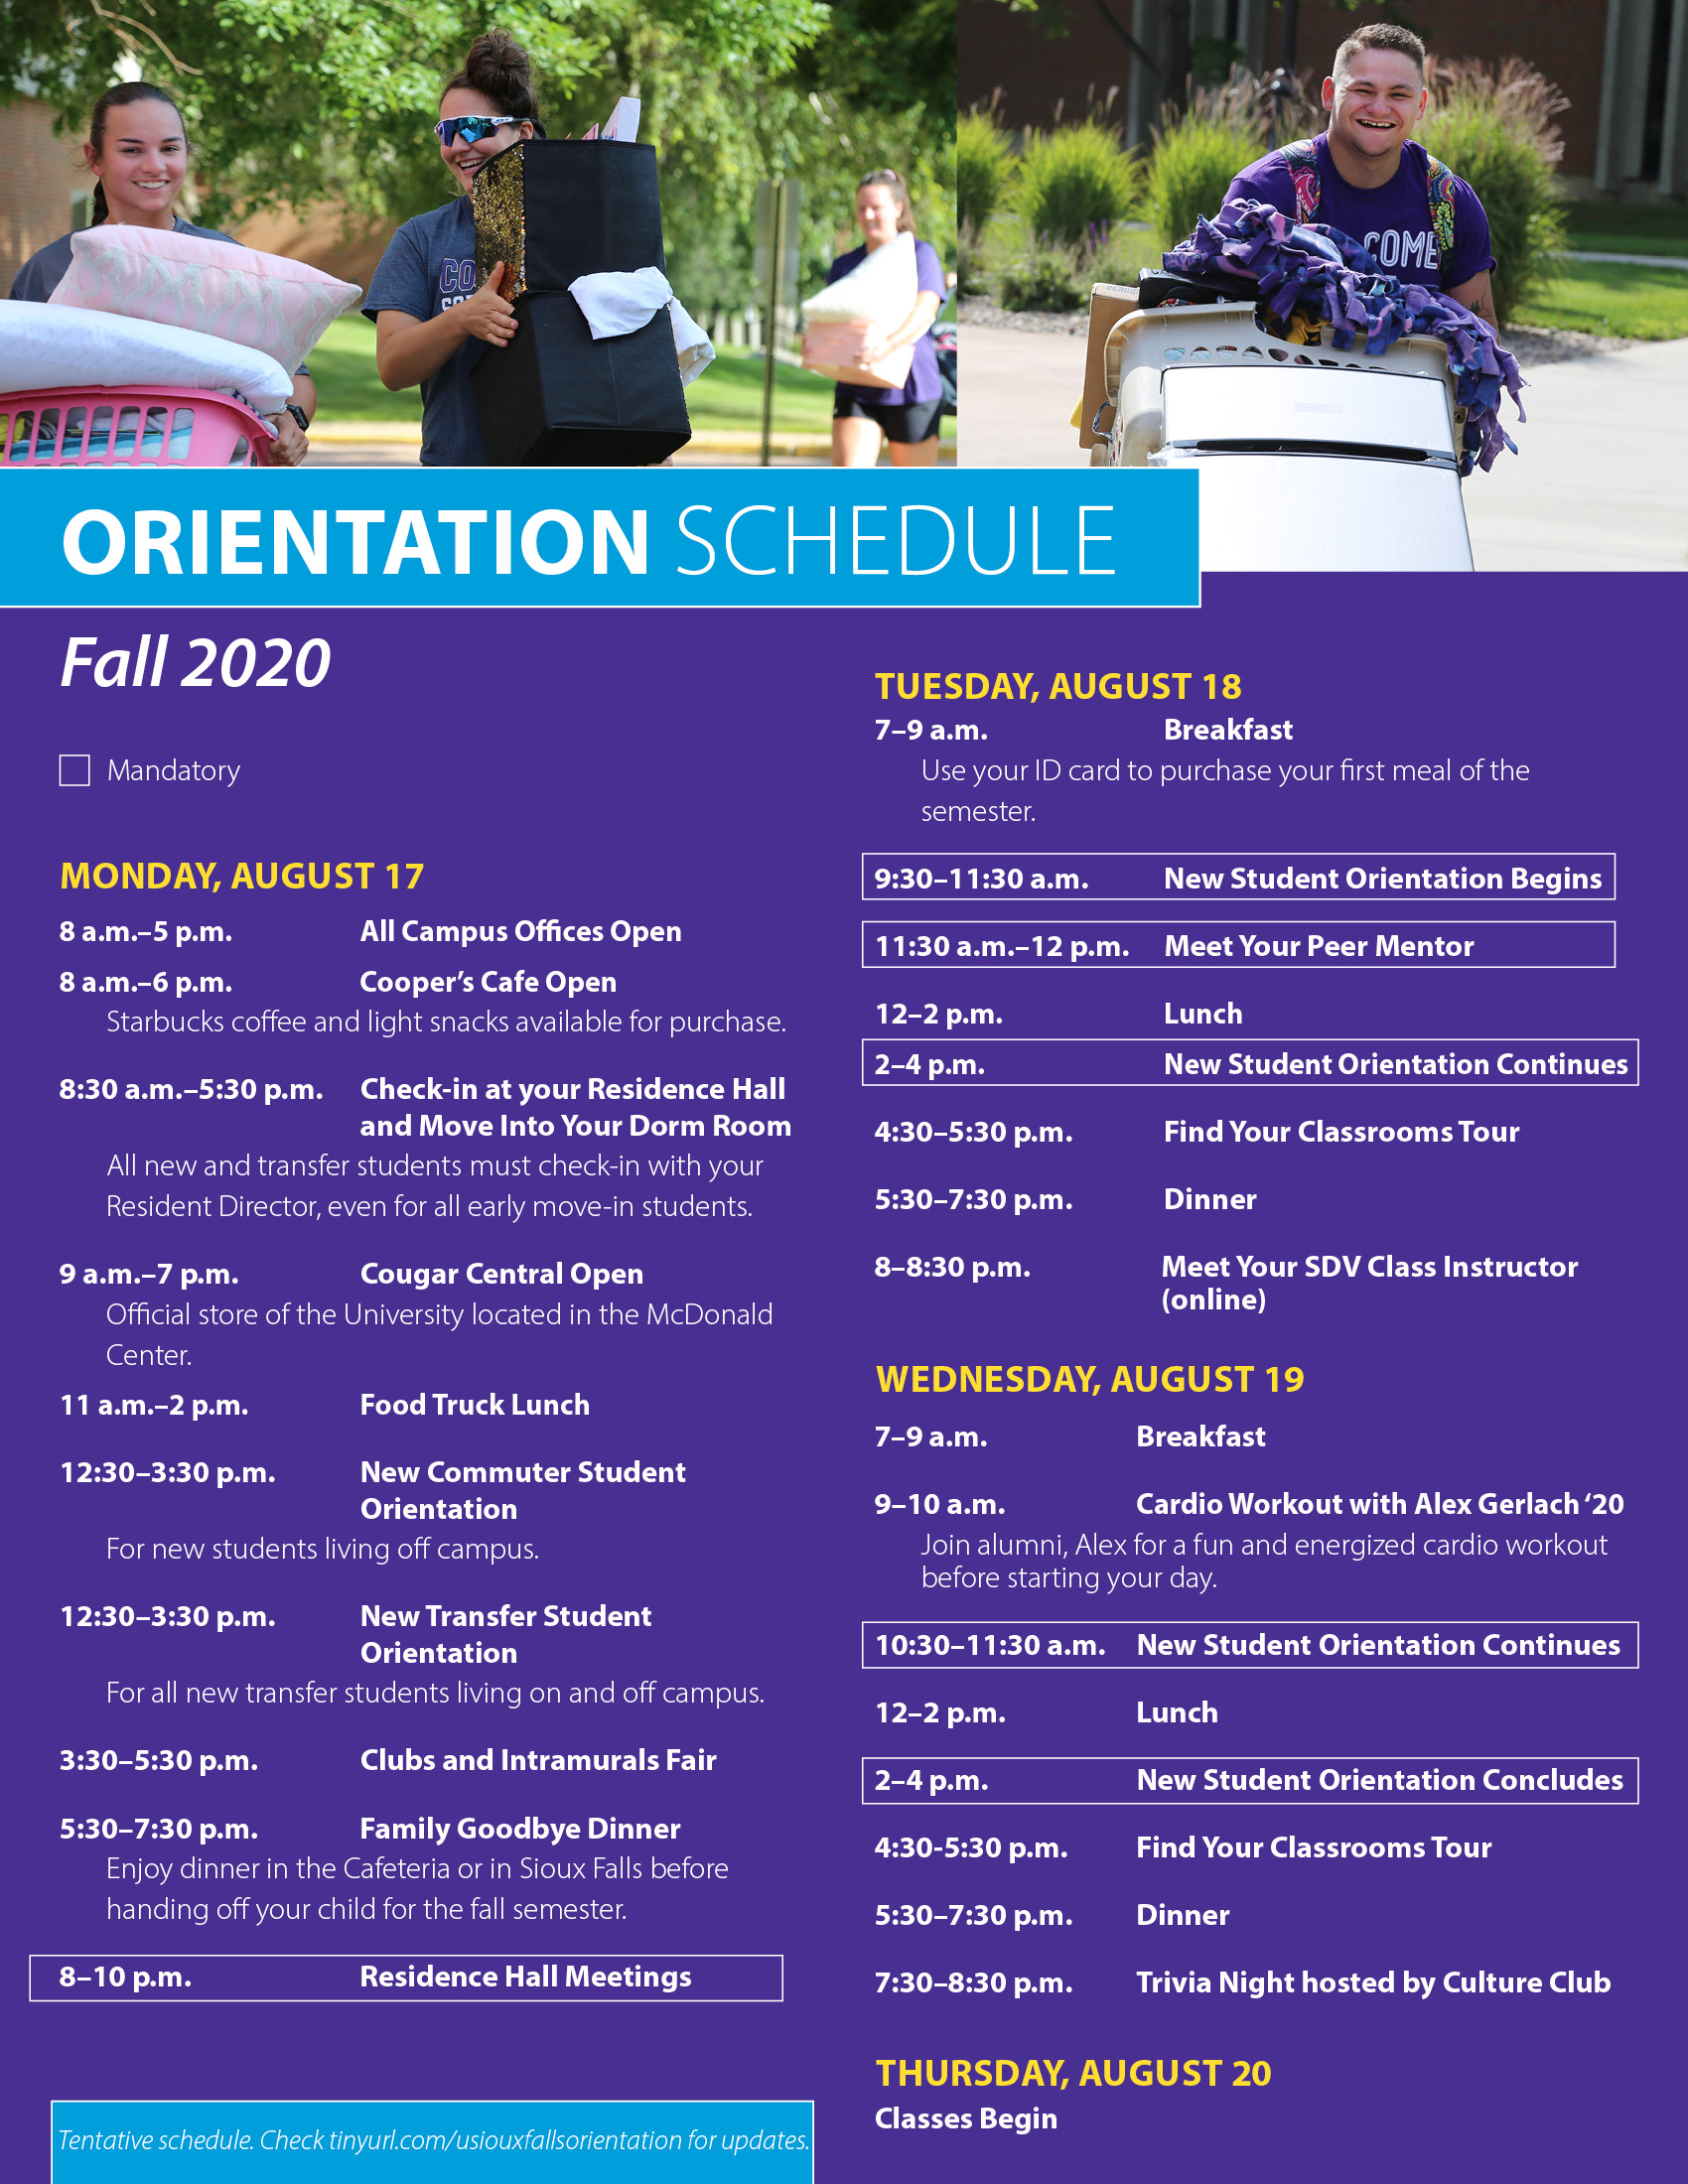 Free-form Content - Main View | Orientation Schedule | New Student